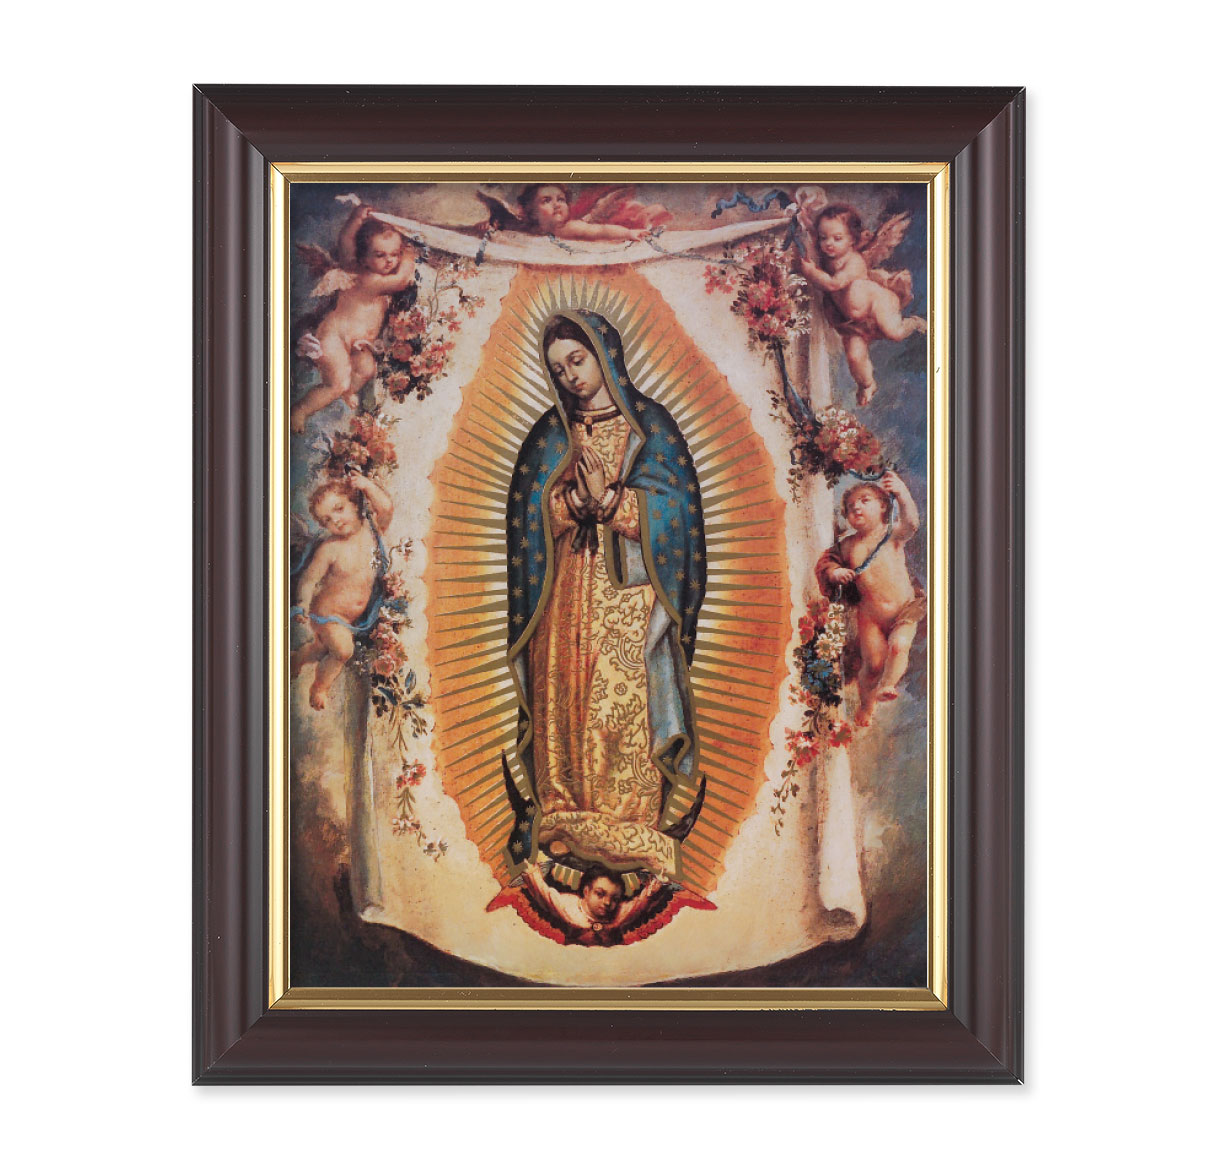 Print Our Lady of Guadalupe 8 x 10 inch Walnut Framed